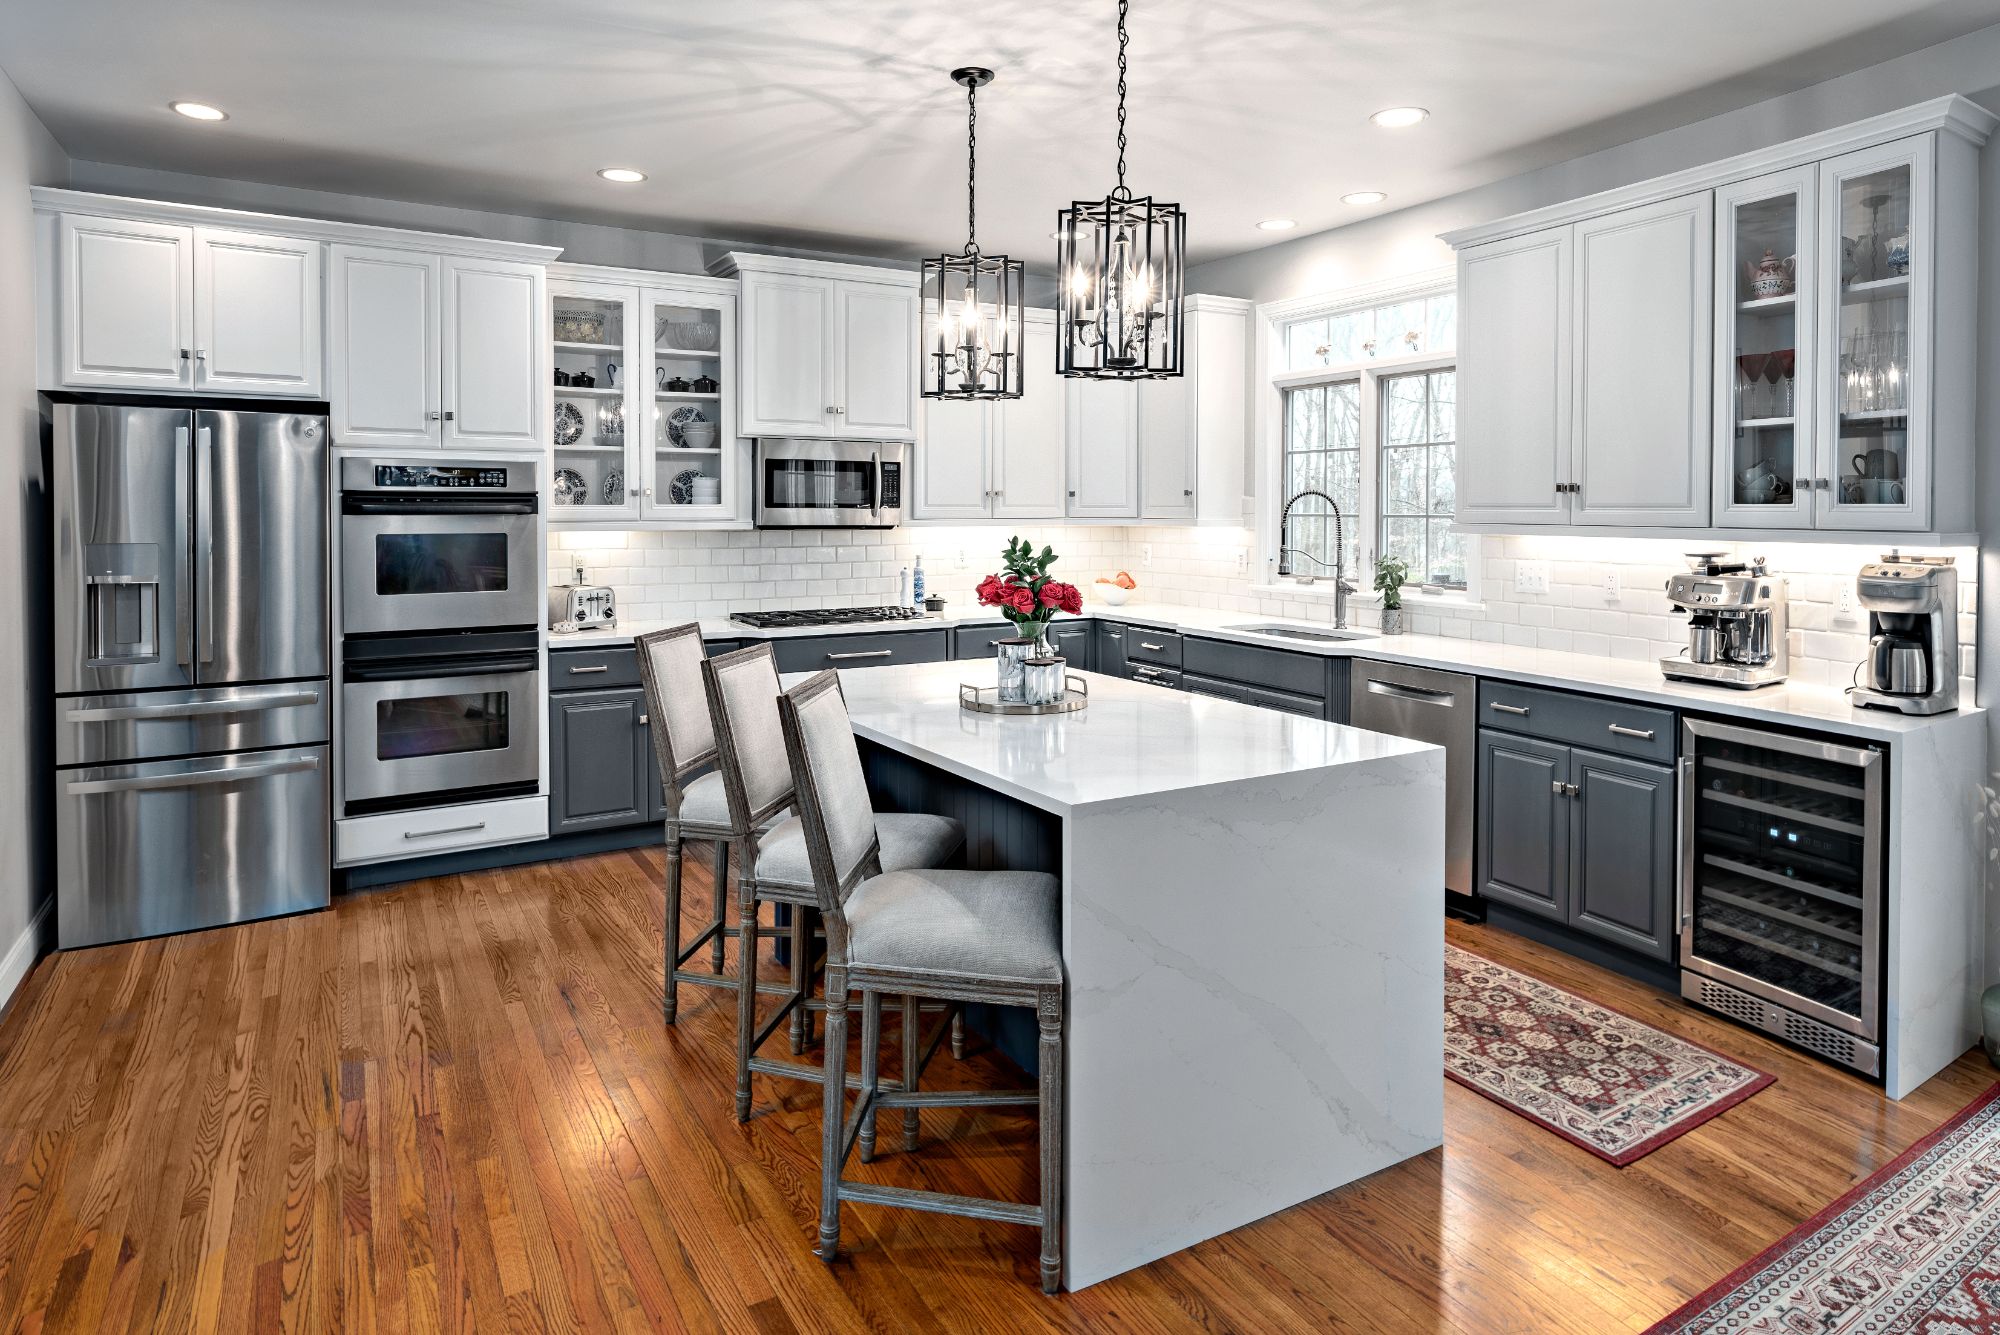 kitchen and bath remodeling in louisville ky